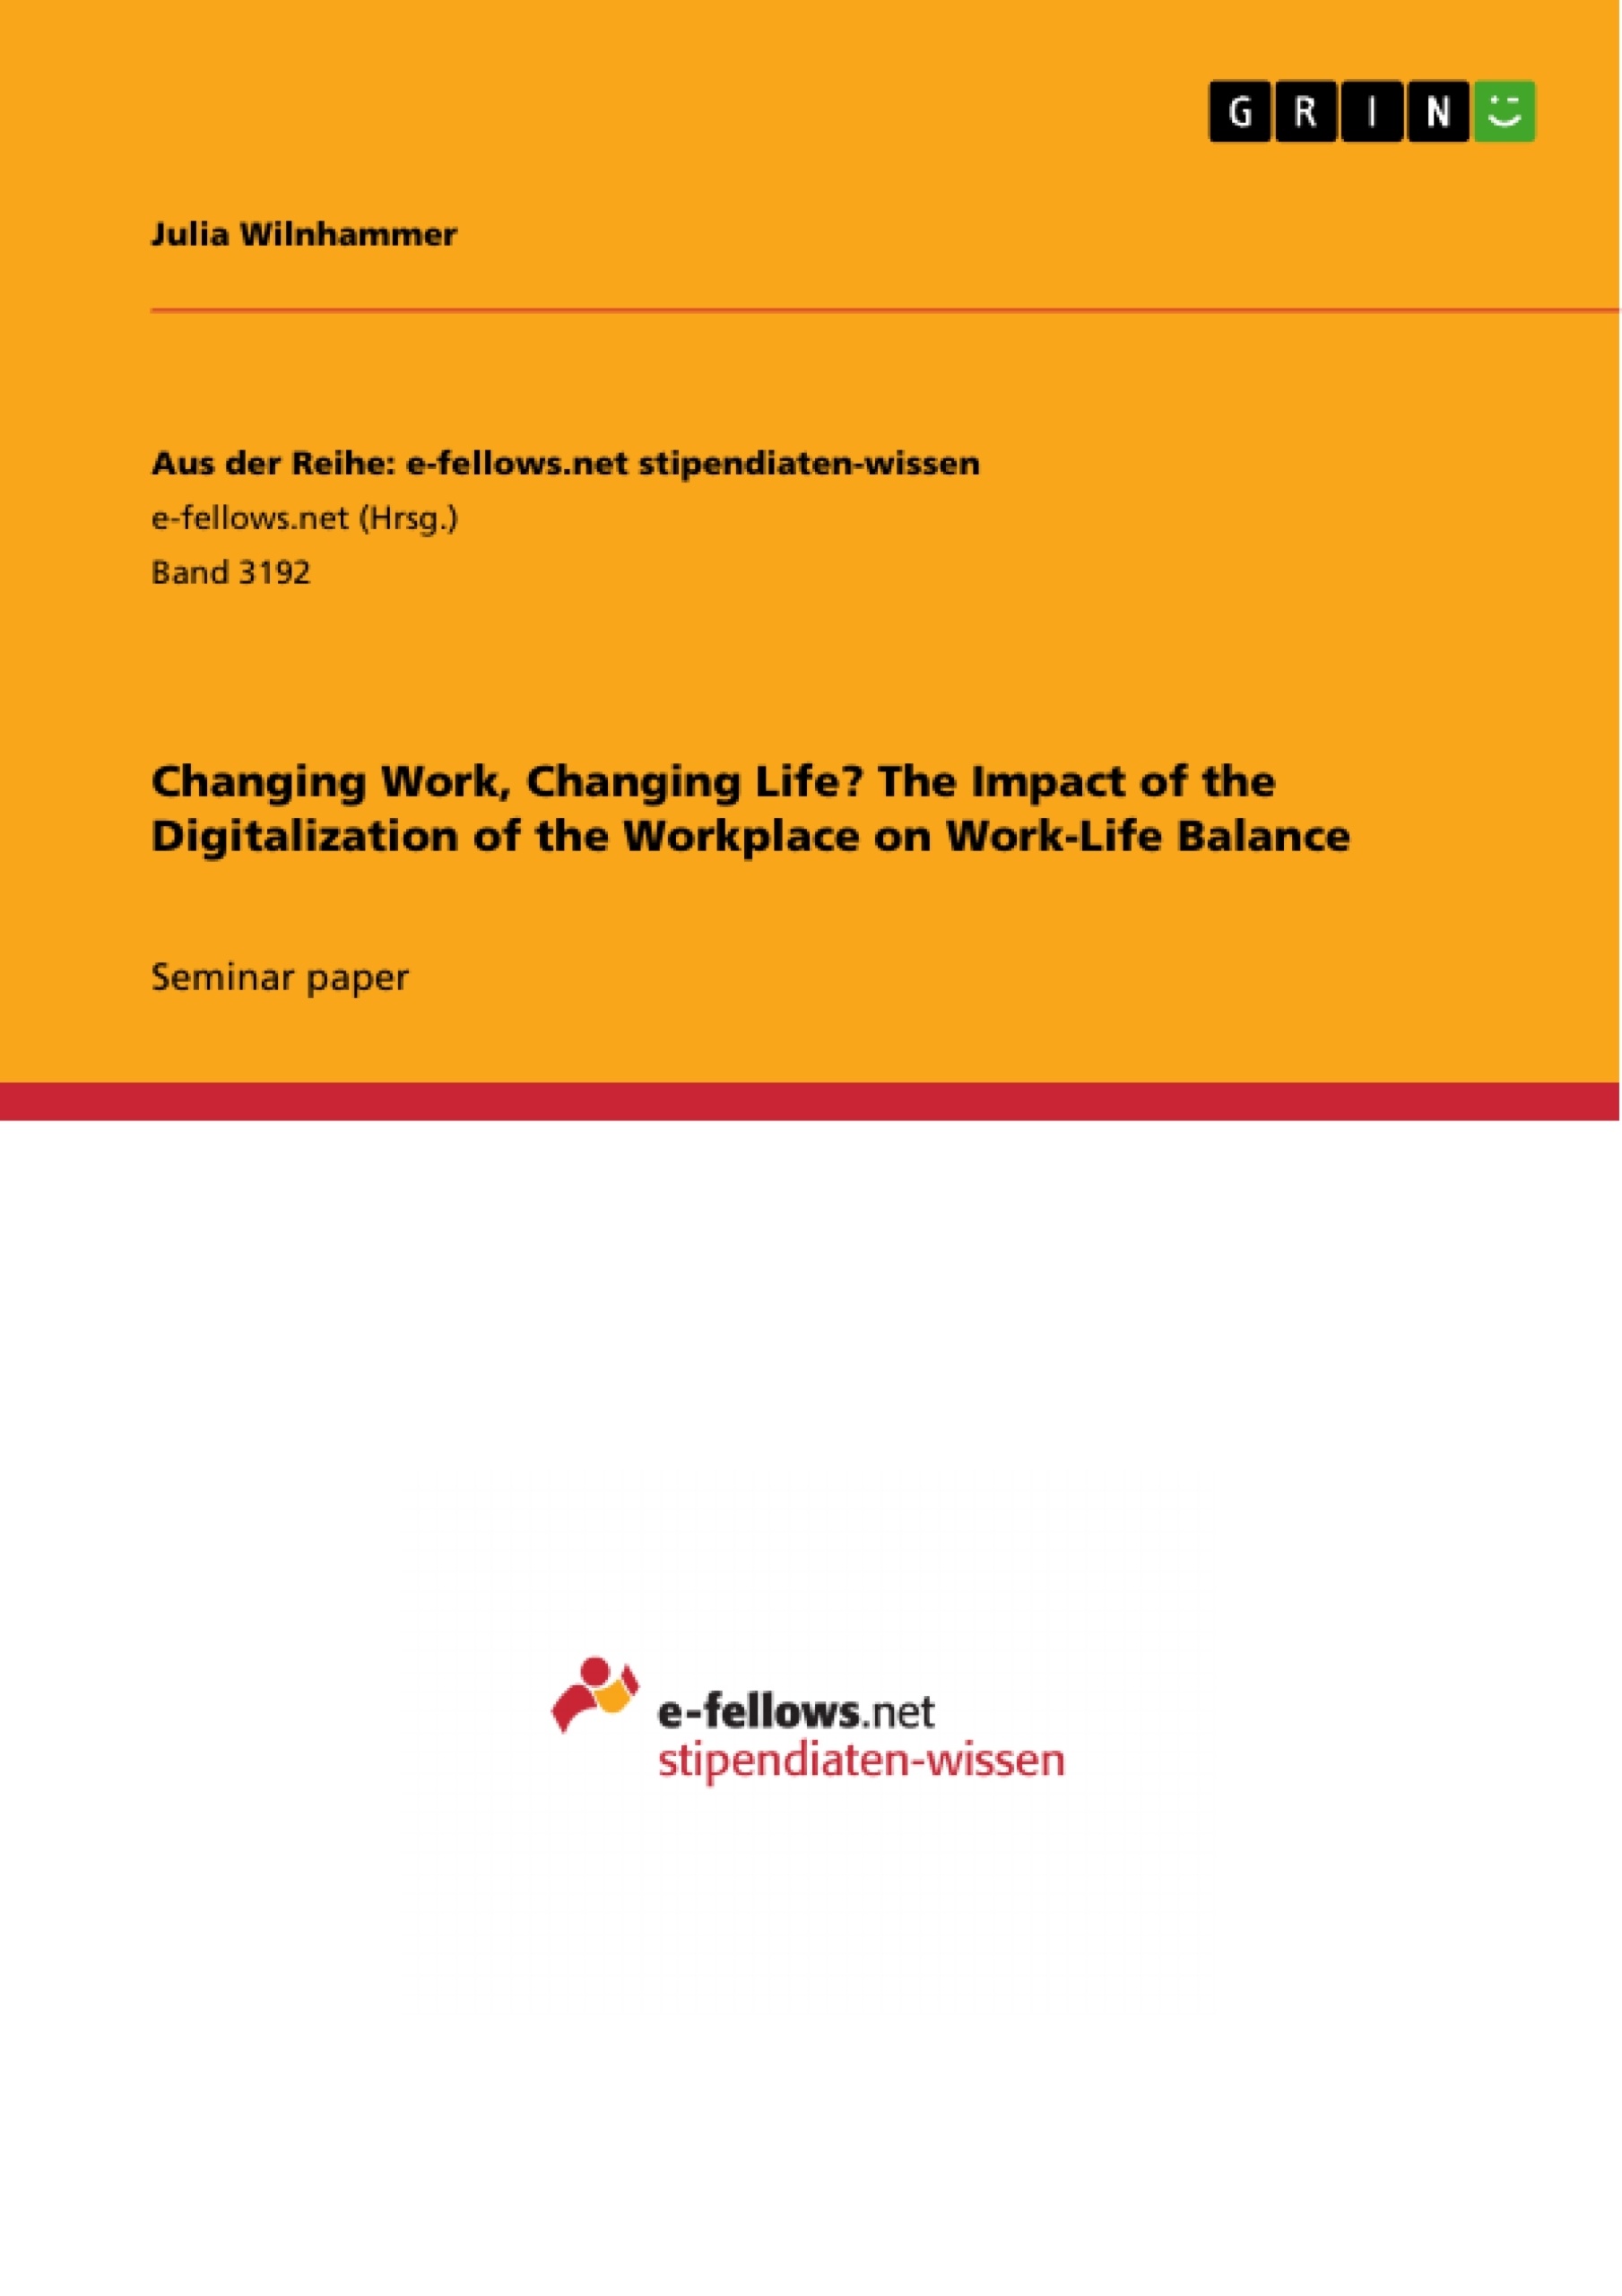 Title: Changing Work, Changing Life? The Impact of the Digitalization of the Workplace on Work-Life Balance